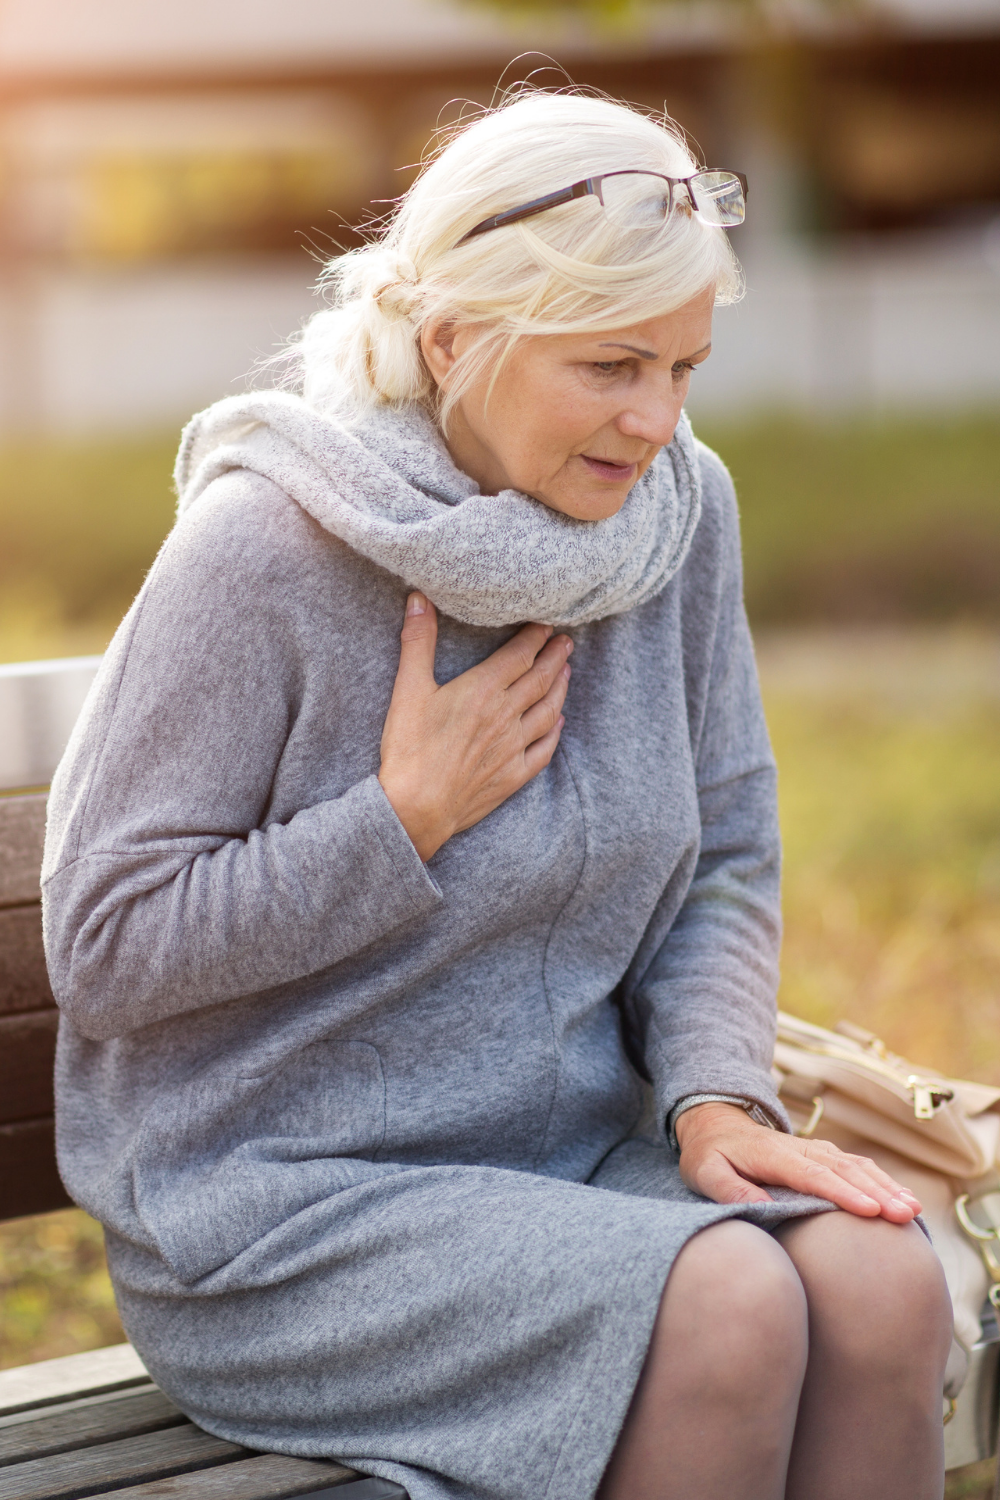 Alleviate Chest Pain at the Best Facility in Covington